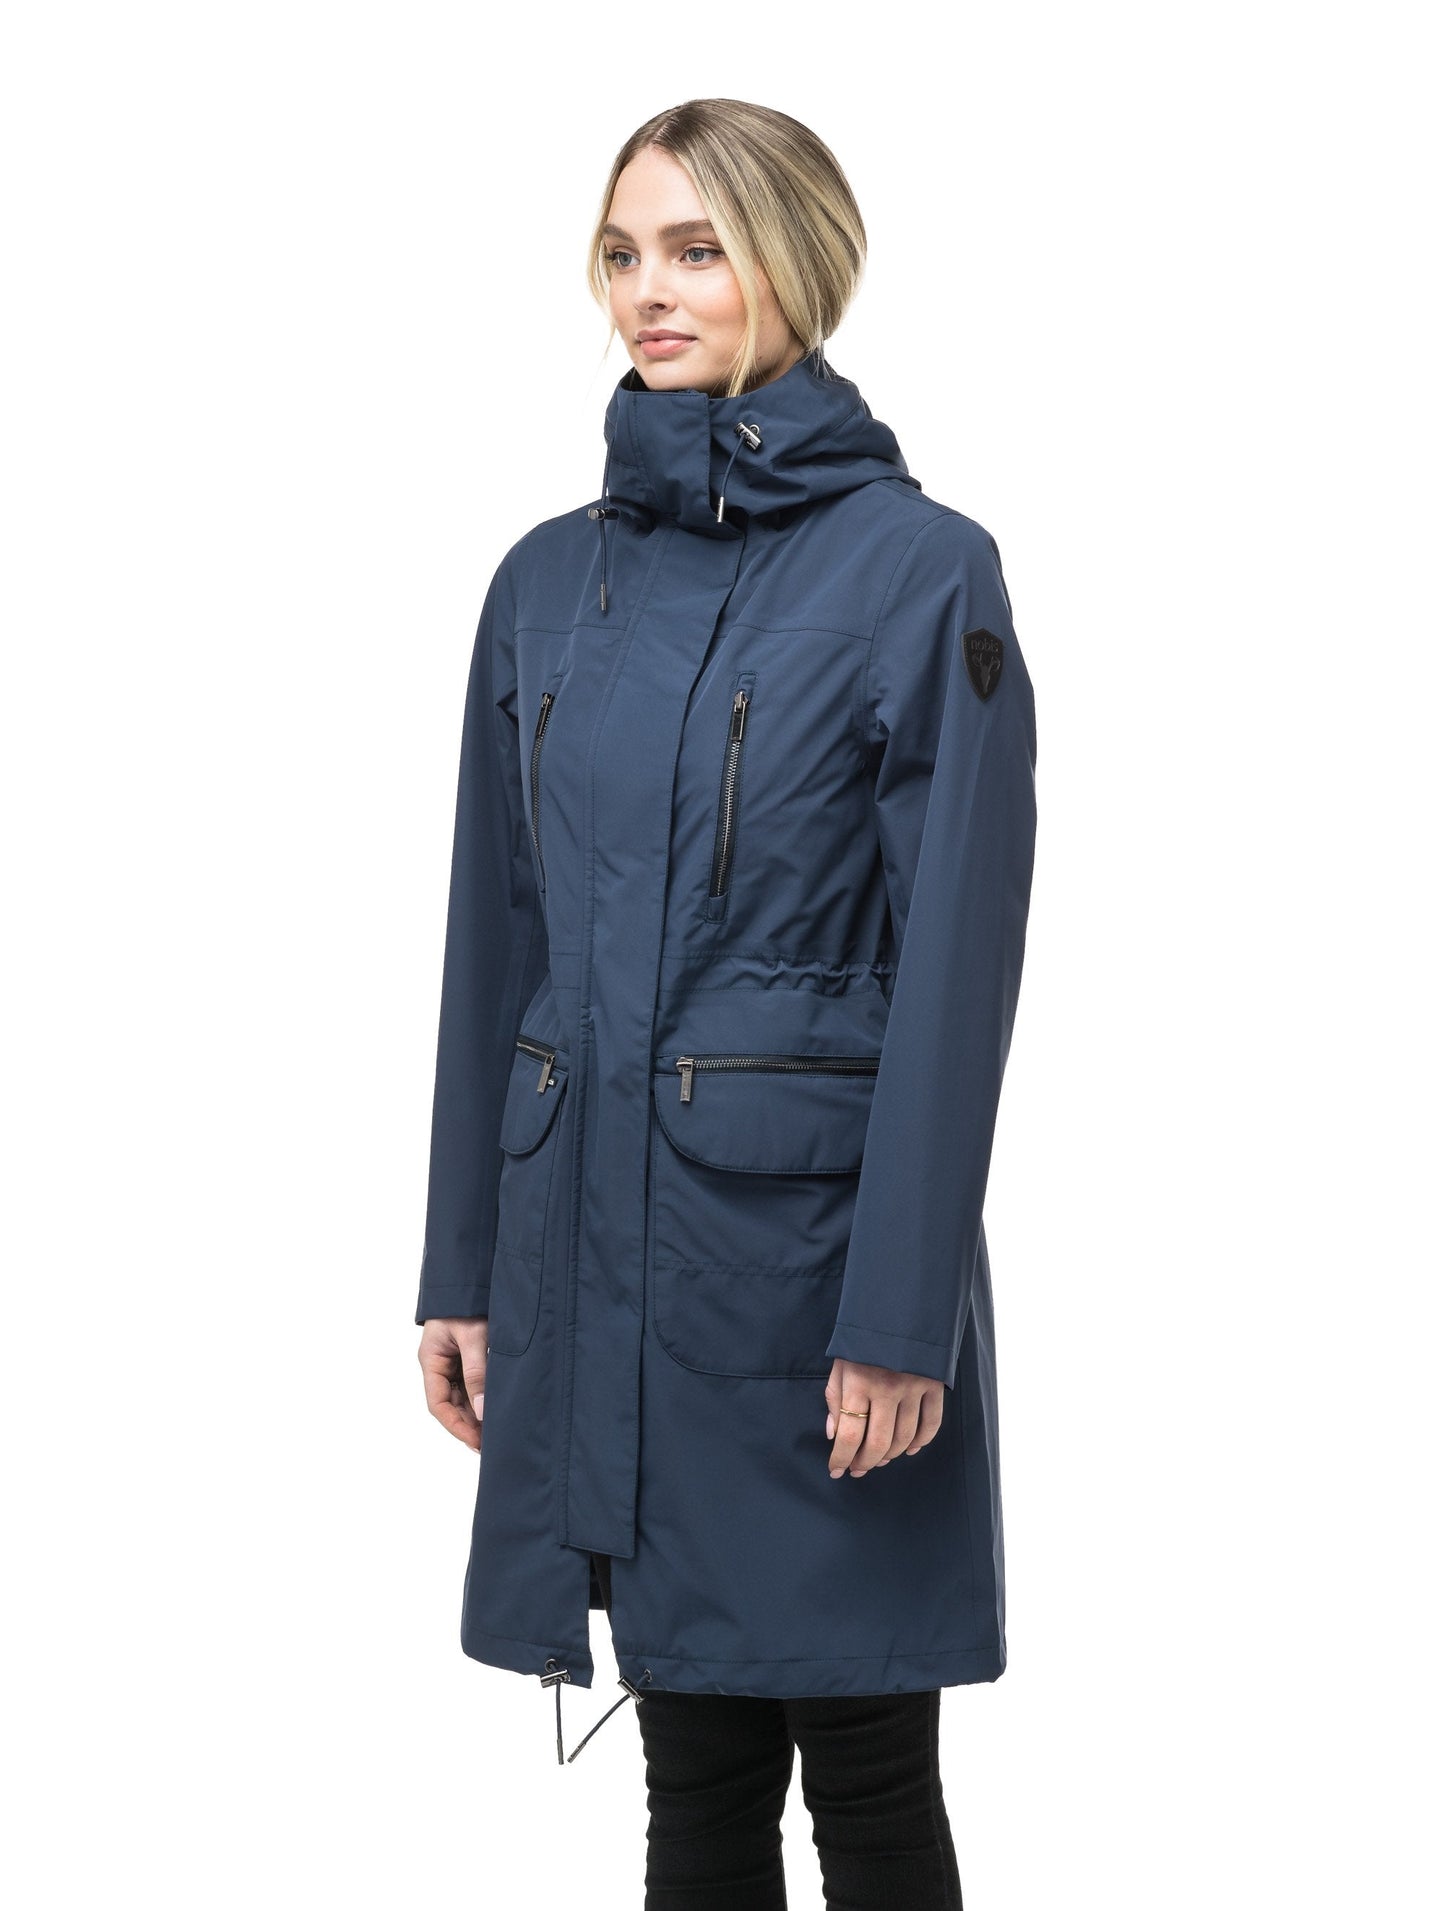 Women's knee length anorak with four front pockets and adjustable cord waist in Marine